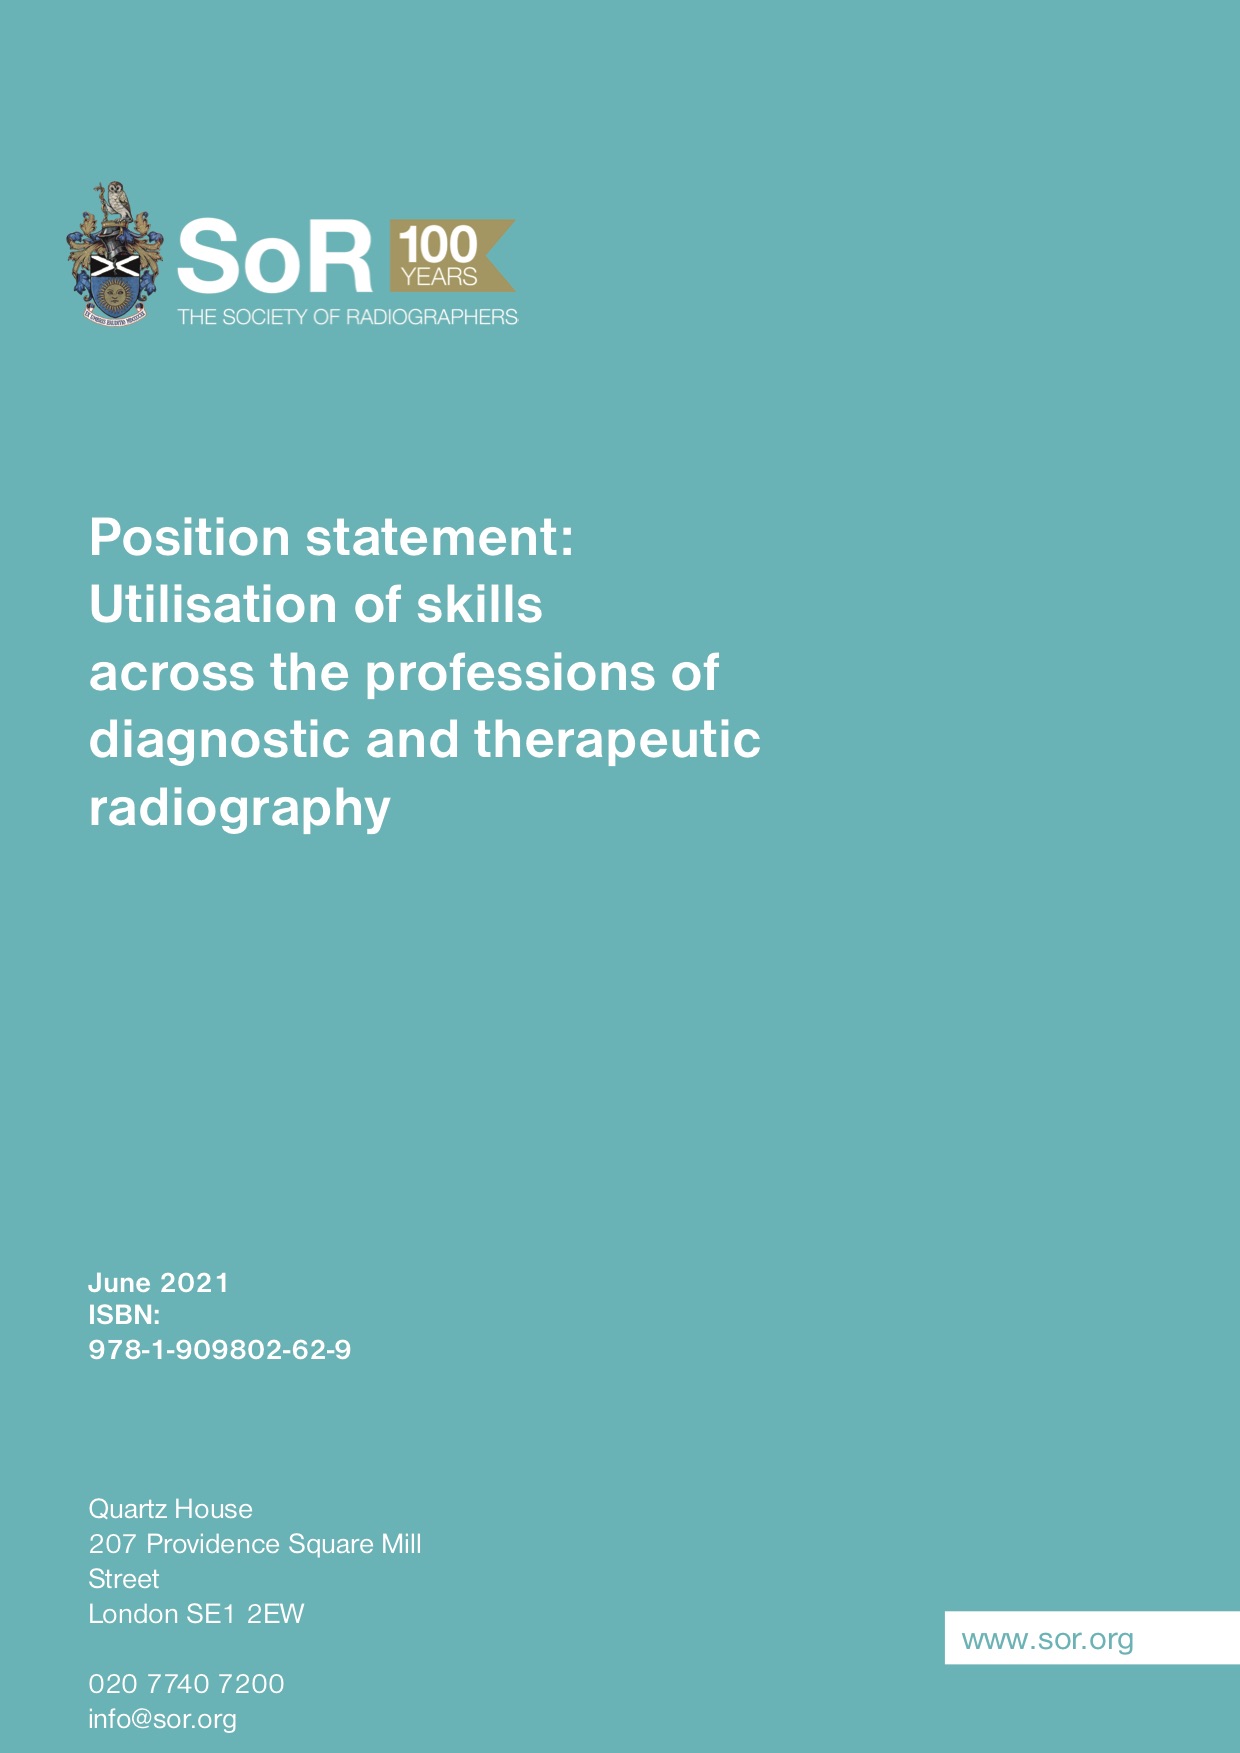 Position statement - Utilisation of skills across the professions of diagnostic and therapeutic radiography